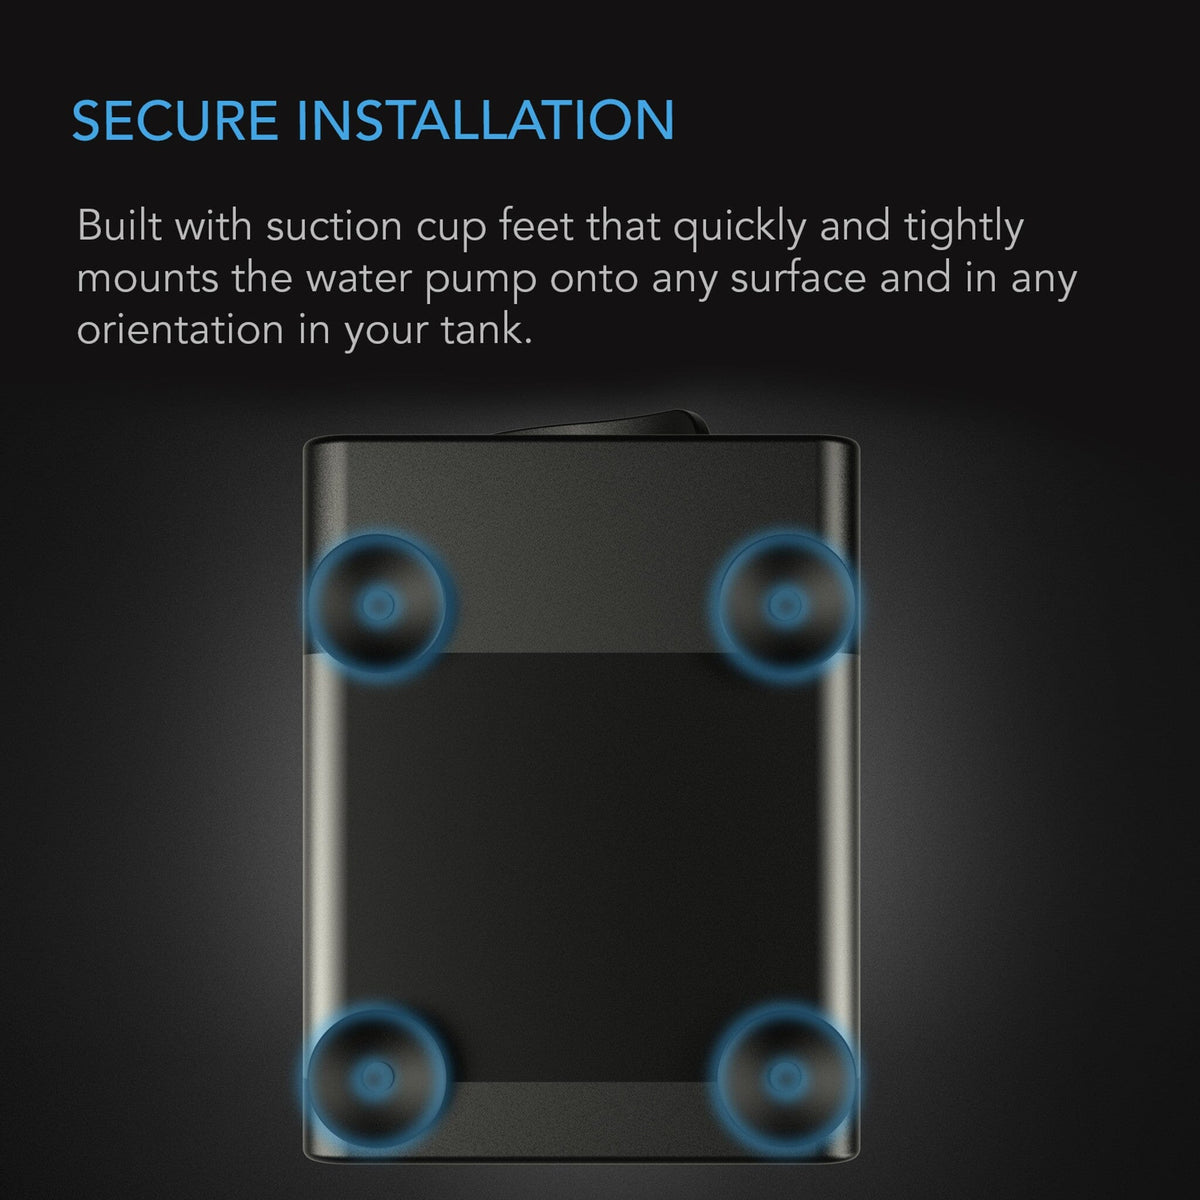 Secure installation